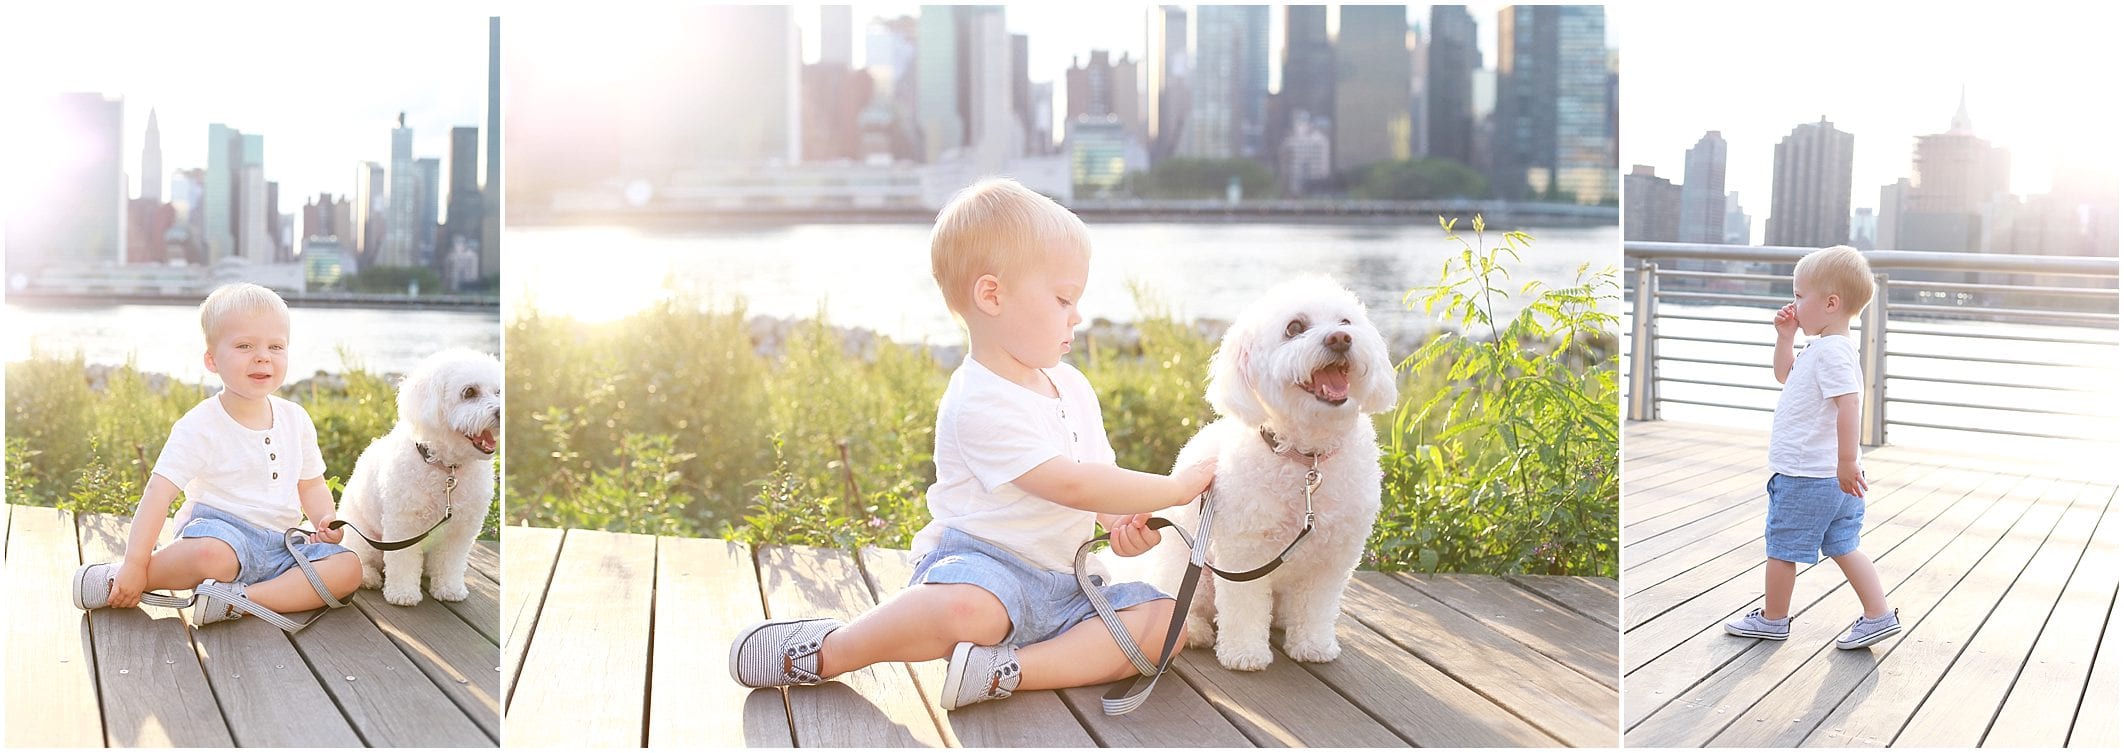 Children of New York: Helena Woods Destination Family Newborn Children's Portraiture shares her favorite sessions and kids in New York City. Locations featured: Central Park Gantry Plaza State Park Long Island Prospect Park Brooklyn